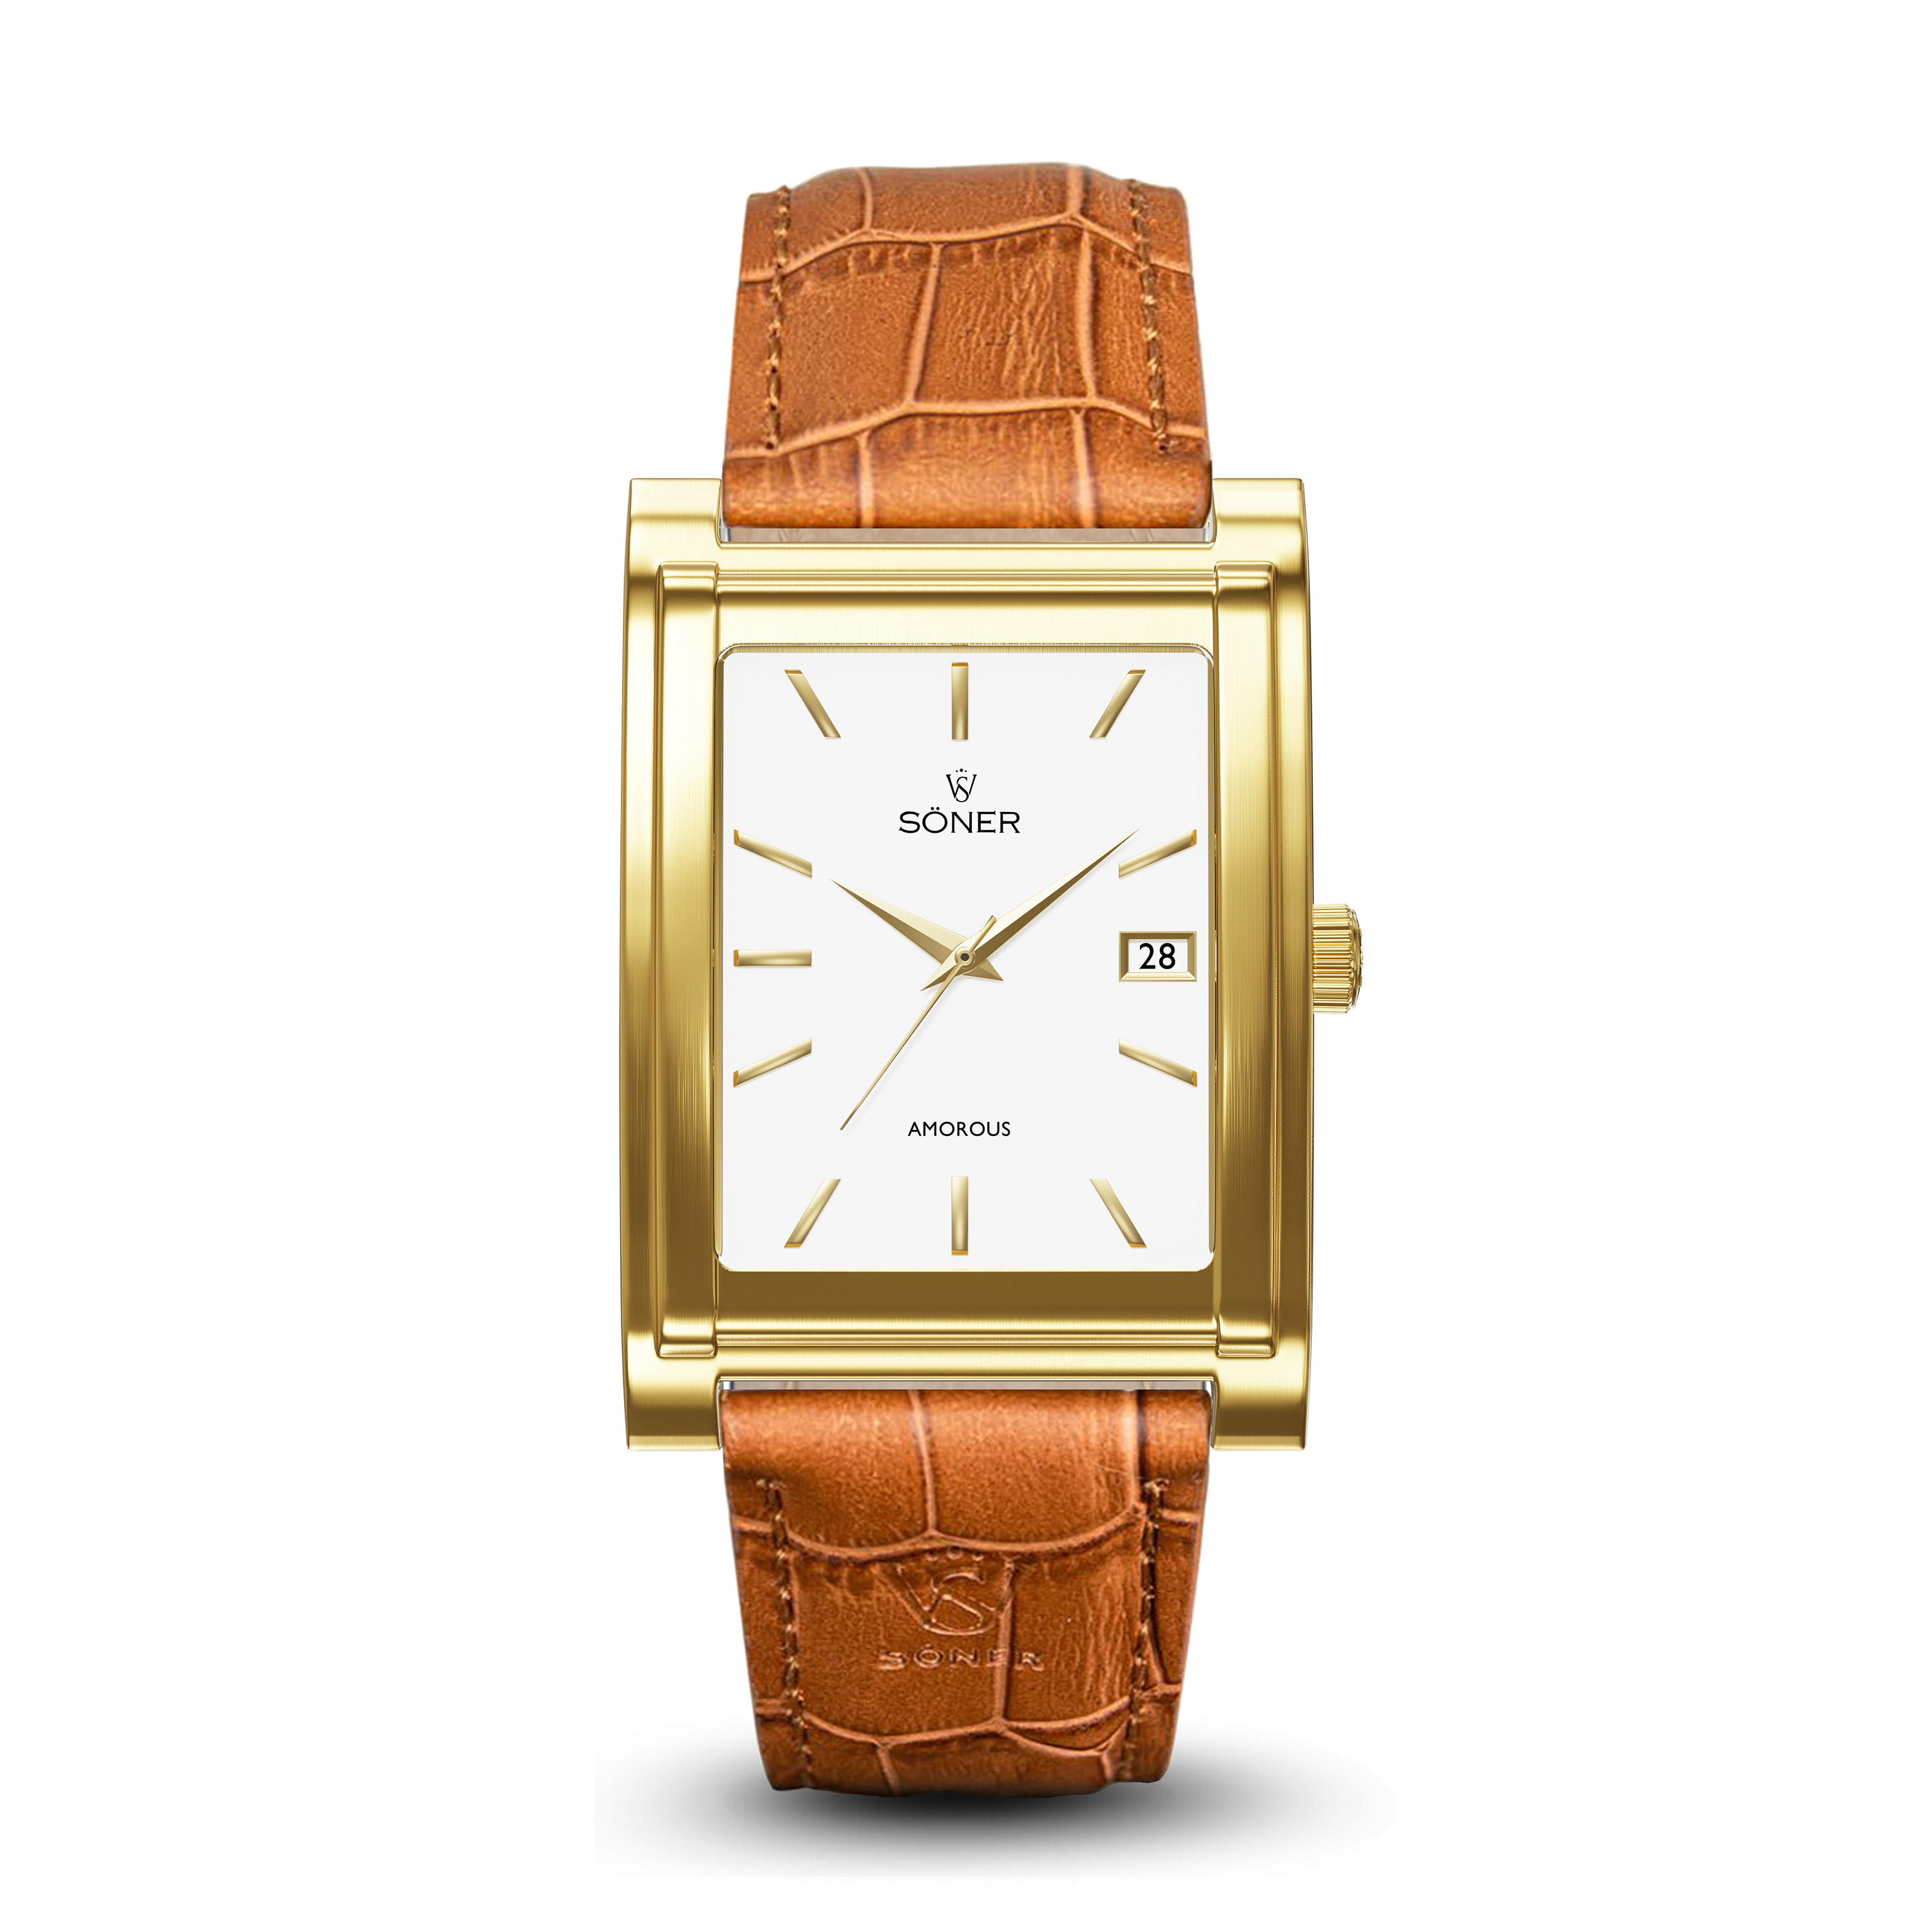 Square automatic watch, Amorous Casablanca with white dial - light brown alligator pattern leather strap front view